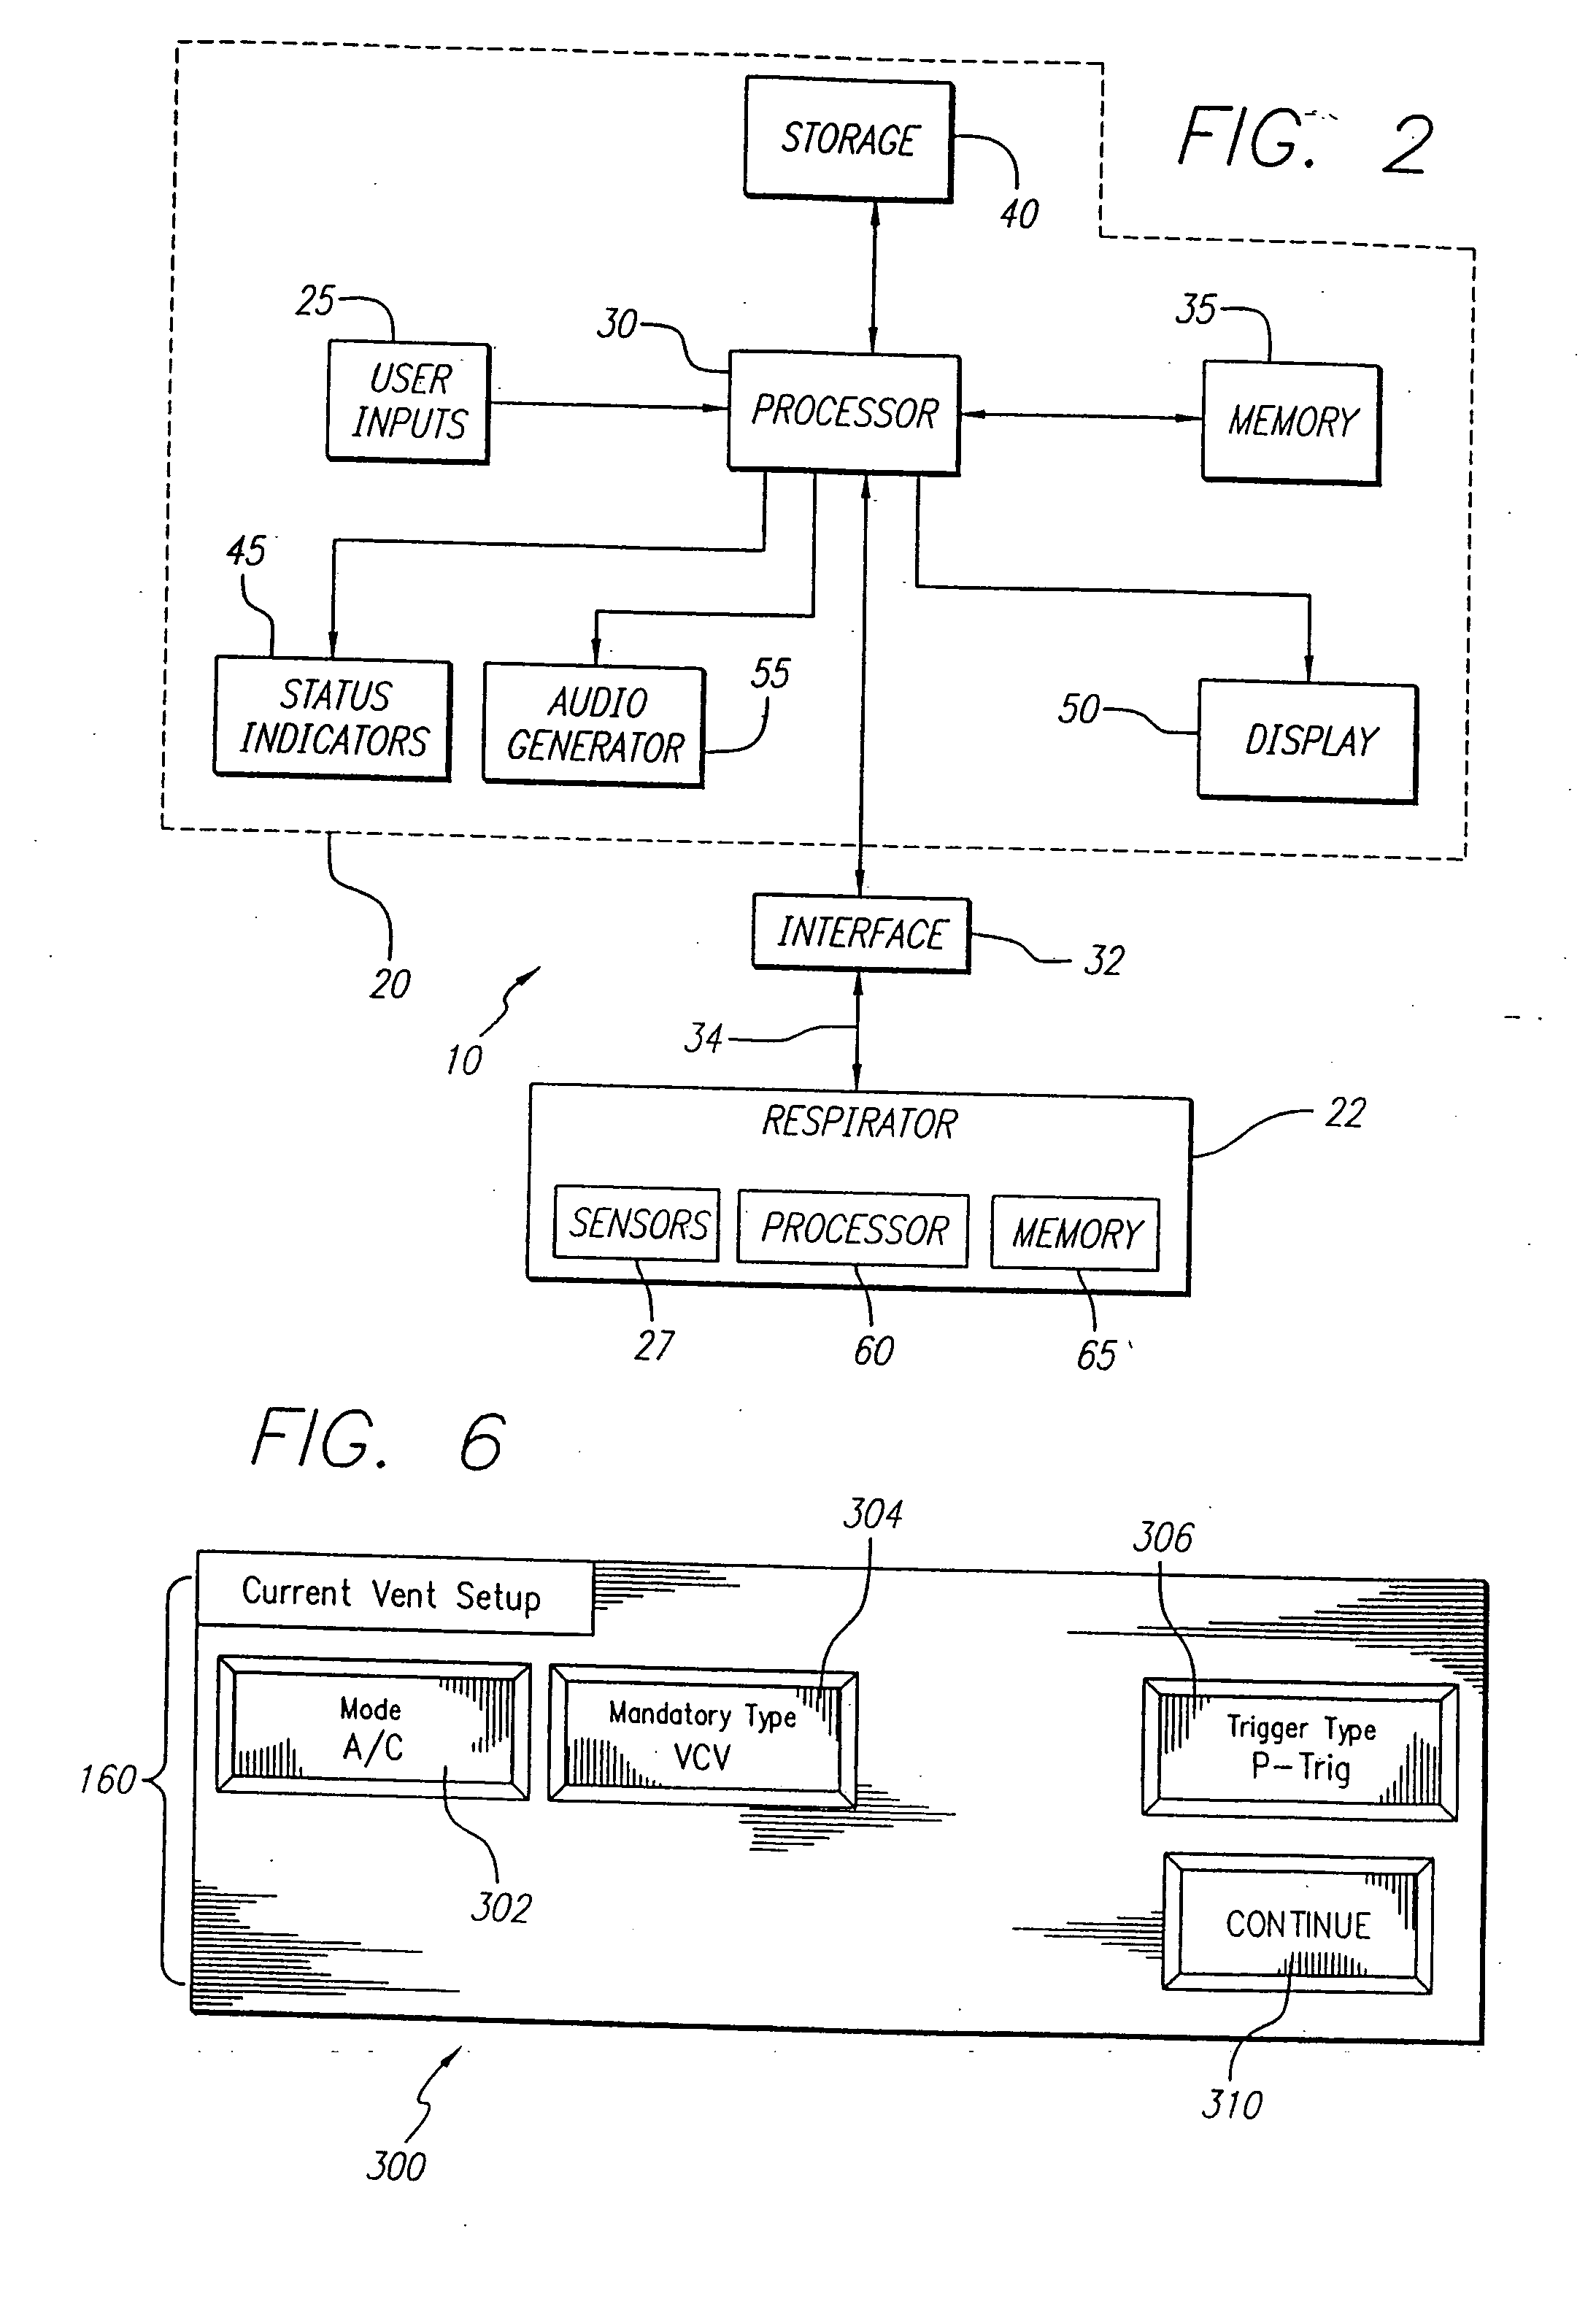 Ventilator breath display and graphic user interface